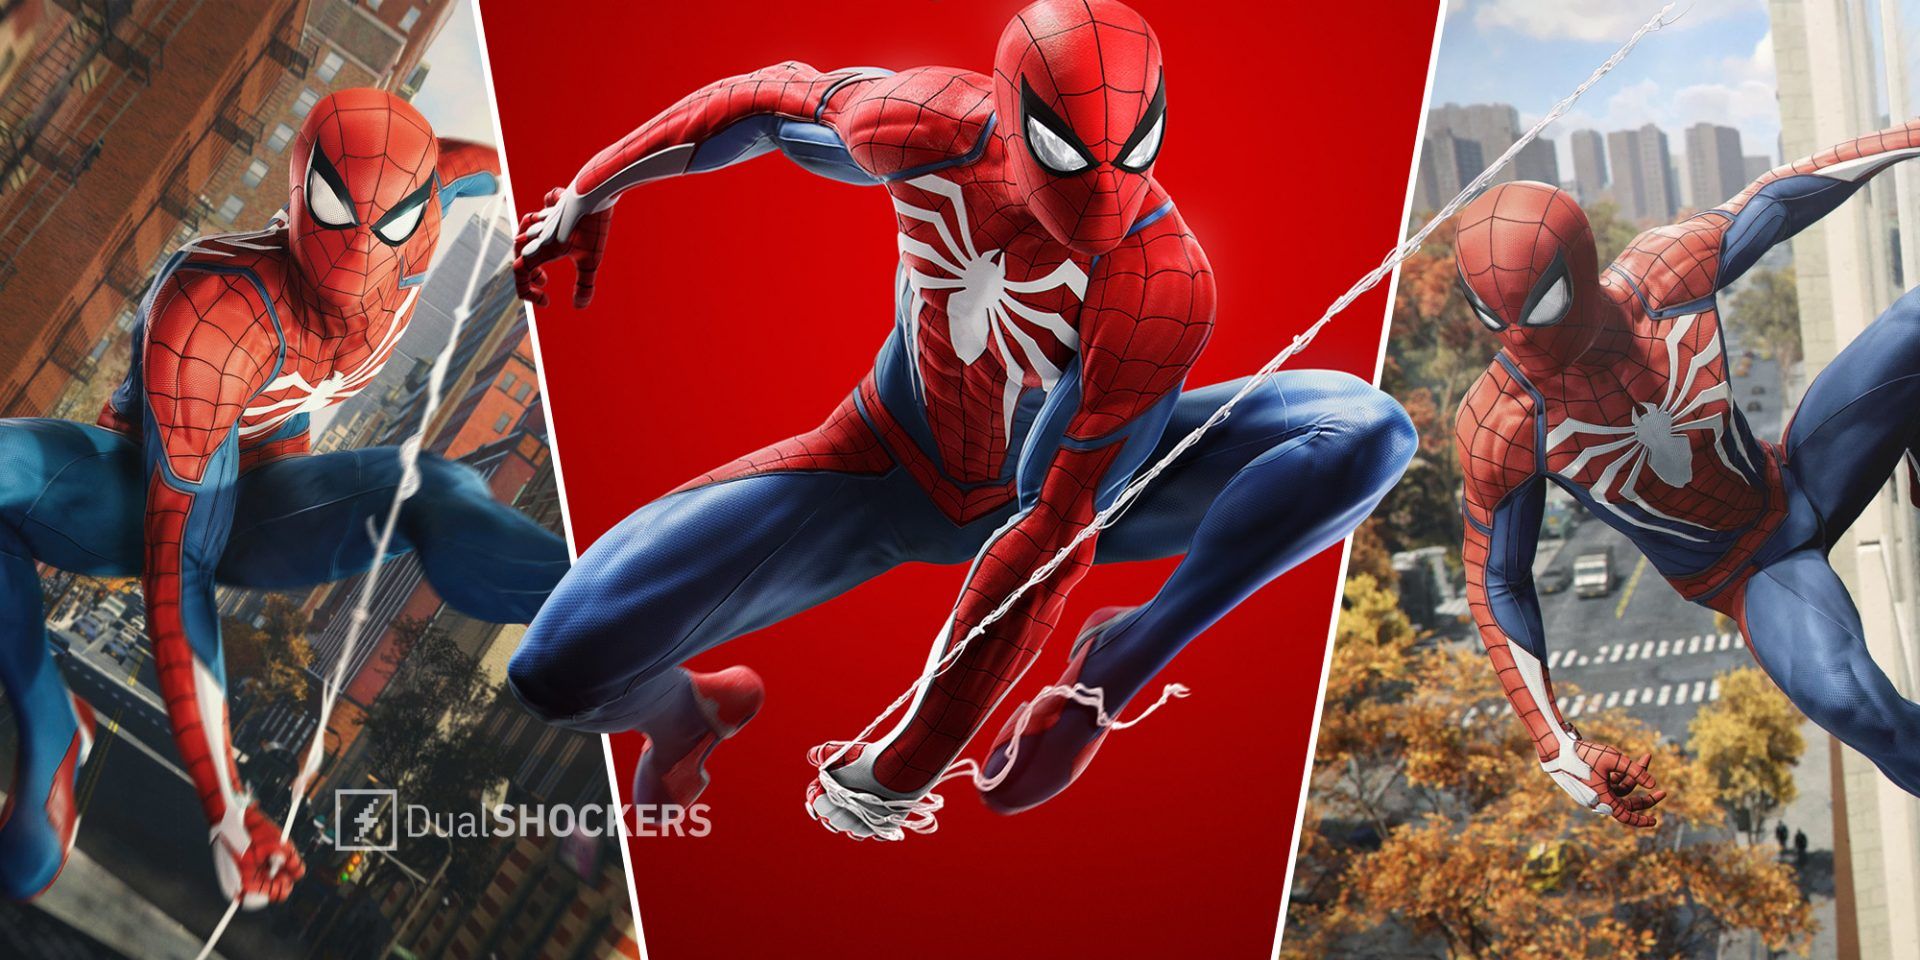 Marvel's Spider-Man Remastered - PC Features Trailer I PC Games 